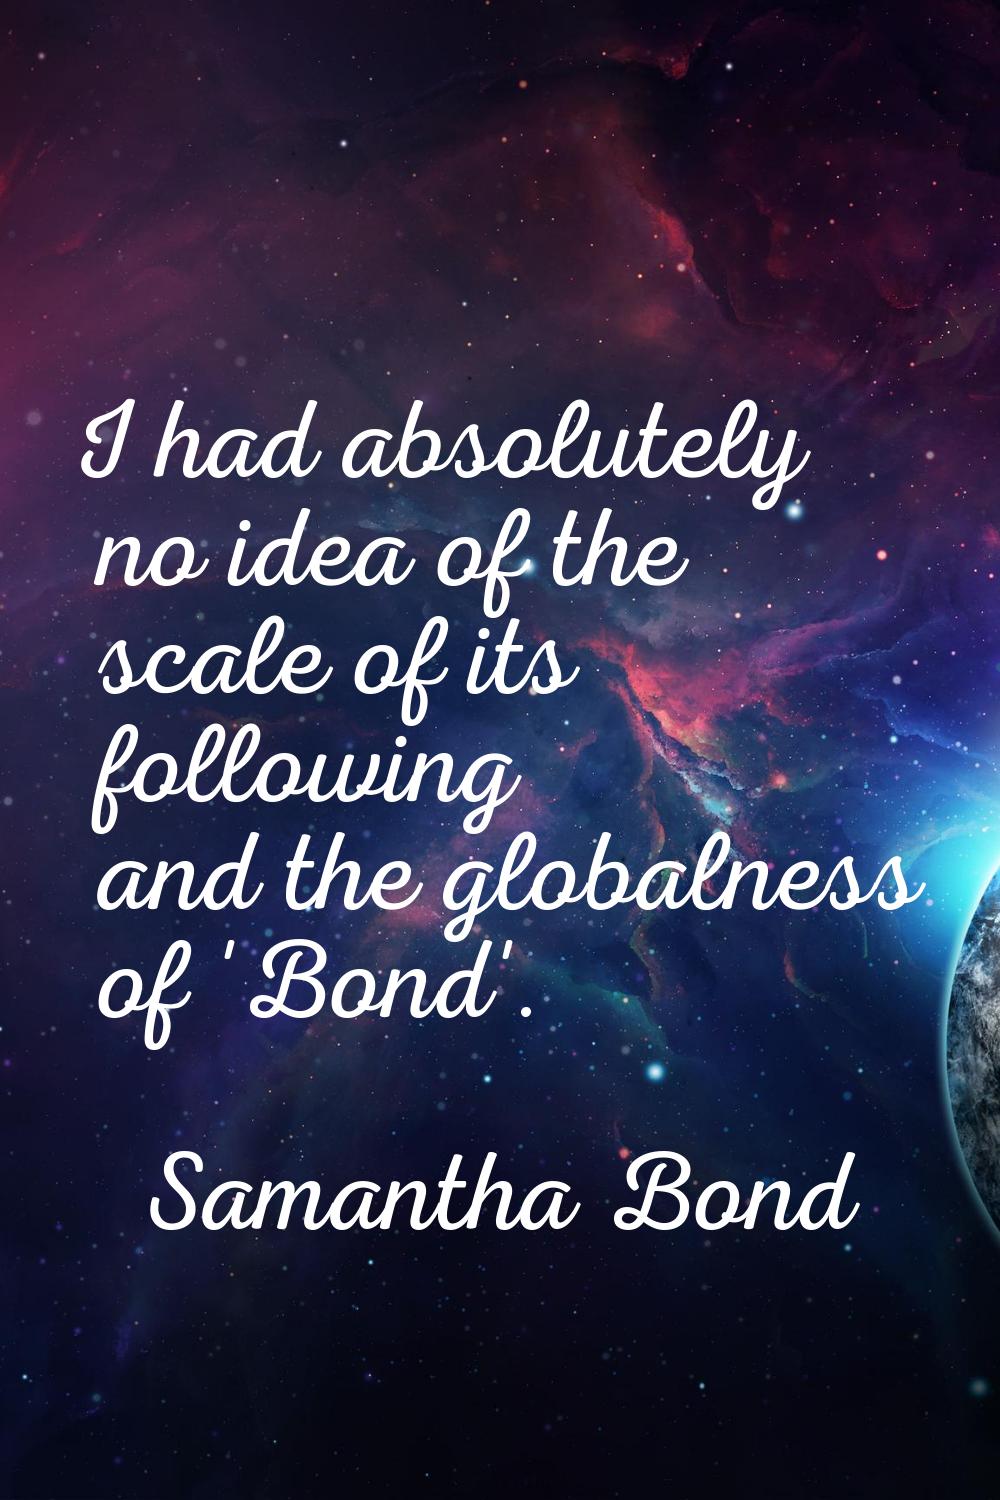 I had absolutely no idea of the scale of its following and the globalness of 'Bond'.